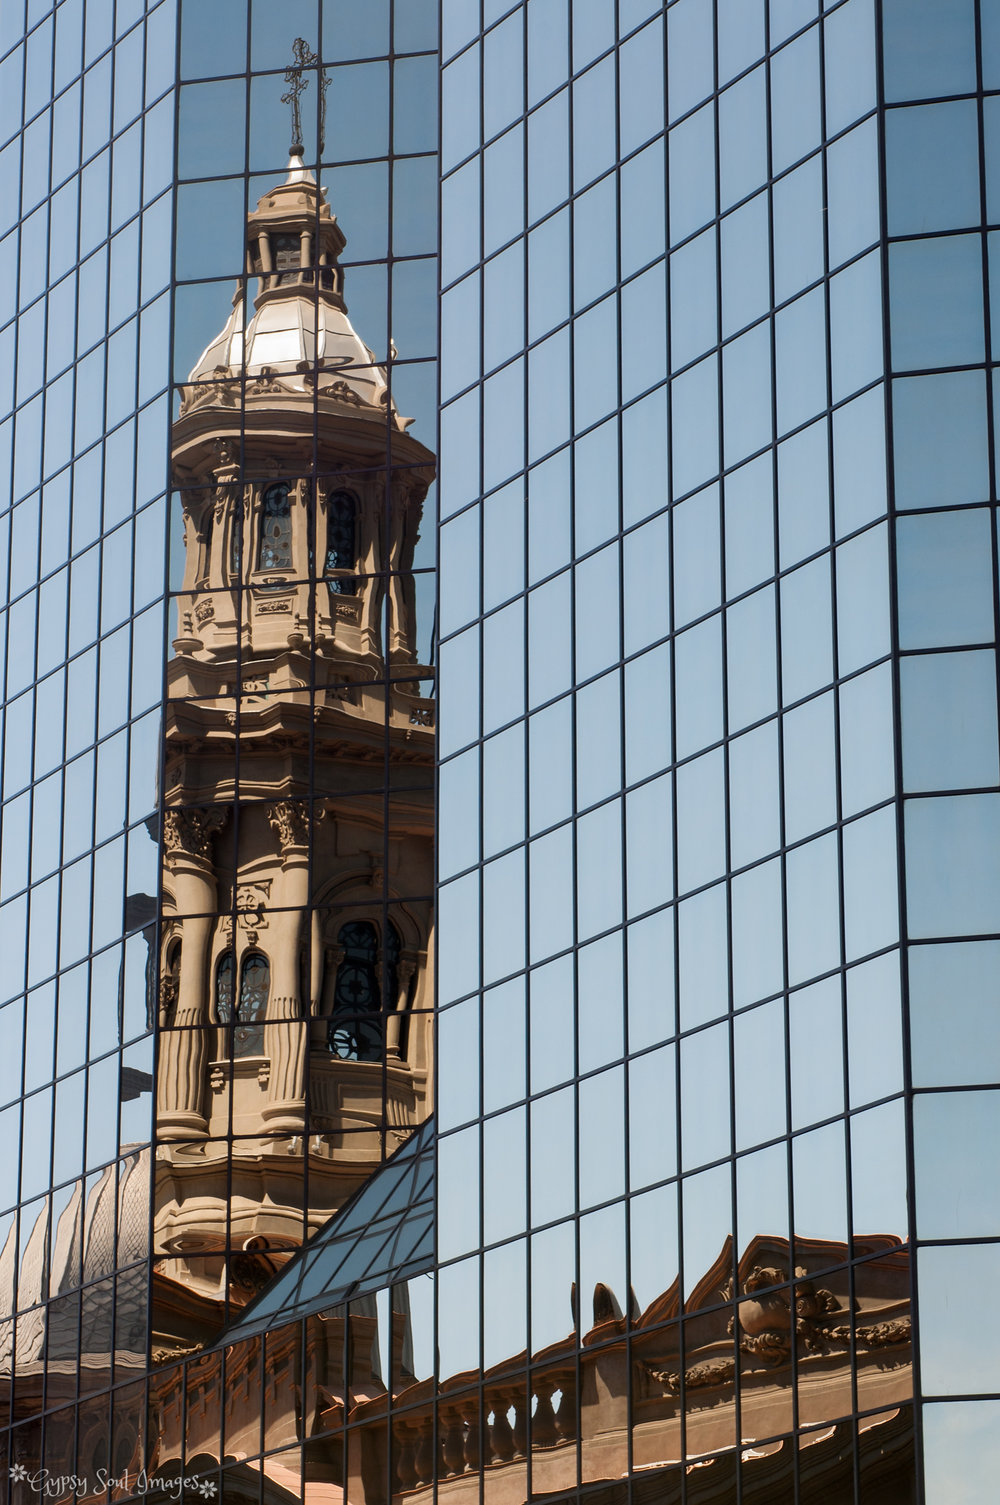 Reflections of Old in New - Santiago, Chile